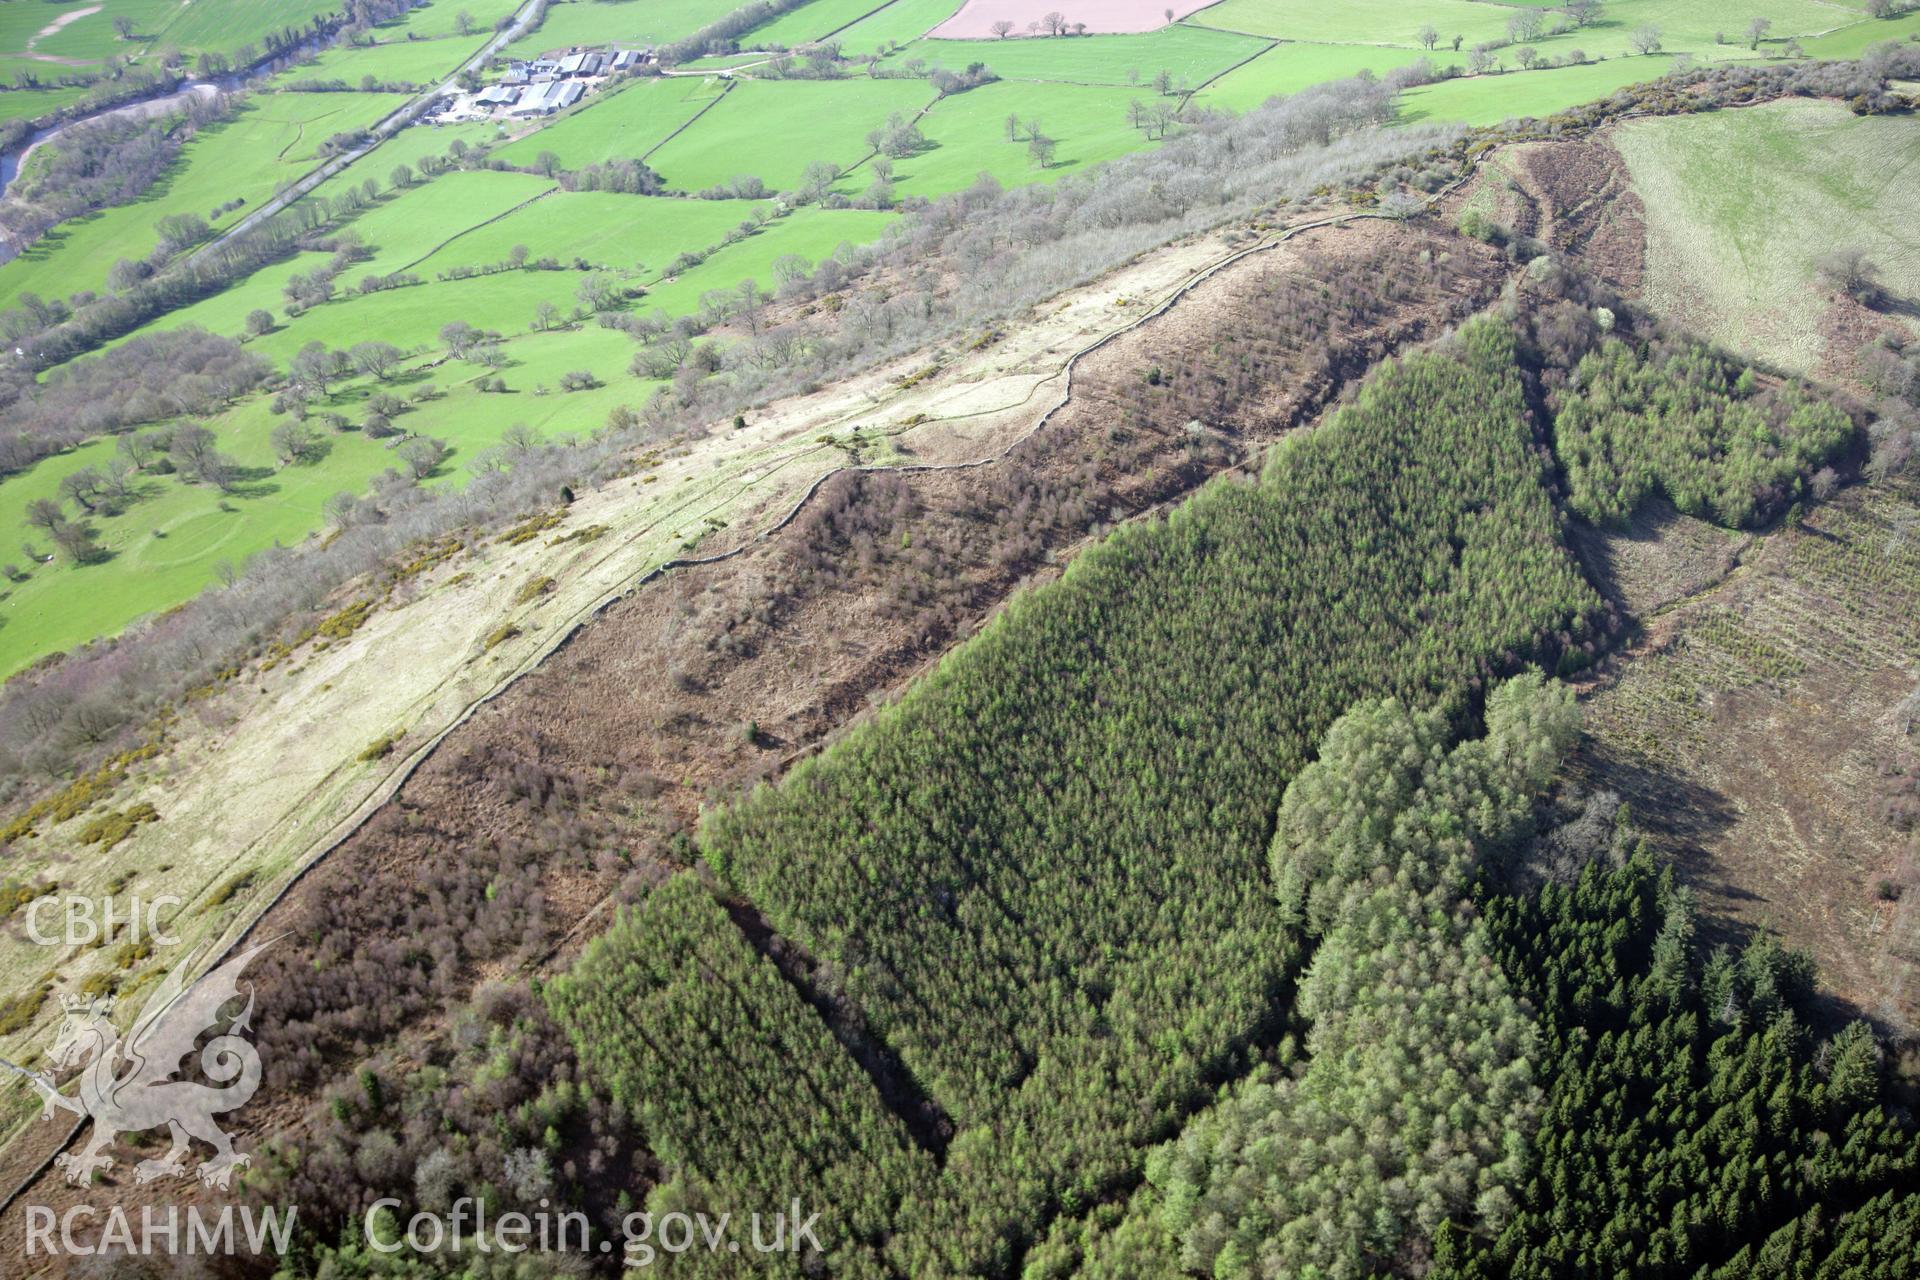 RCAHMW colour oblique photograph of Allt yr Esgair Hillfort. Taken by Toby Driver and Oliver Davies on 28/03/2012.